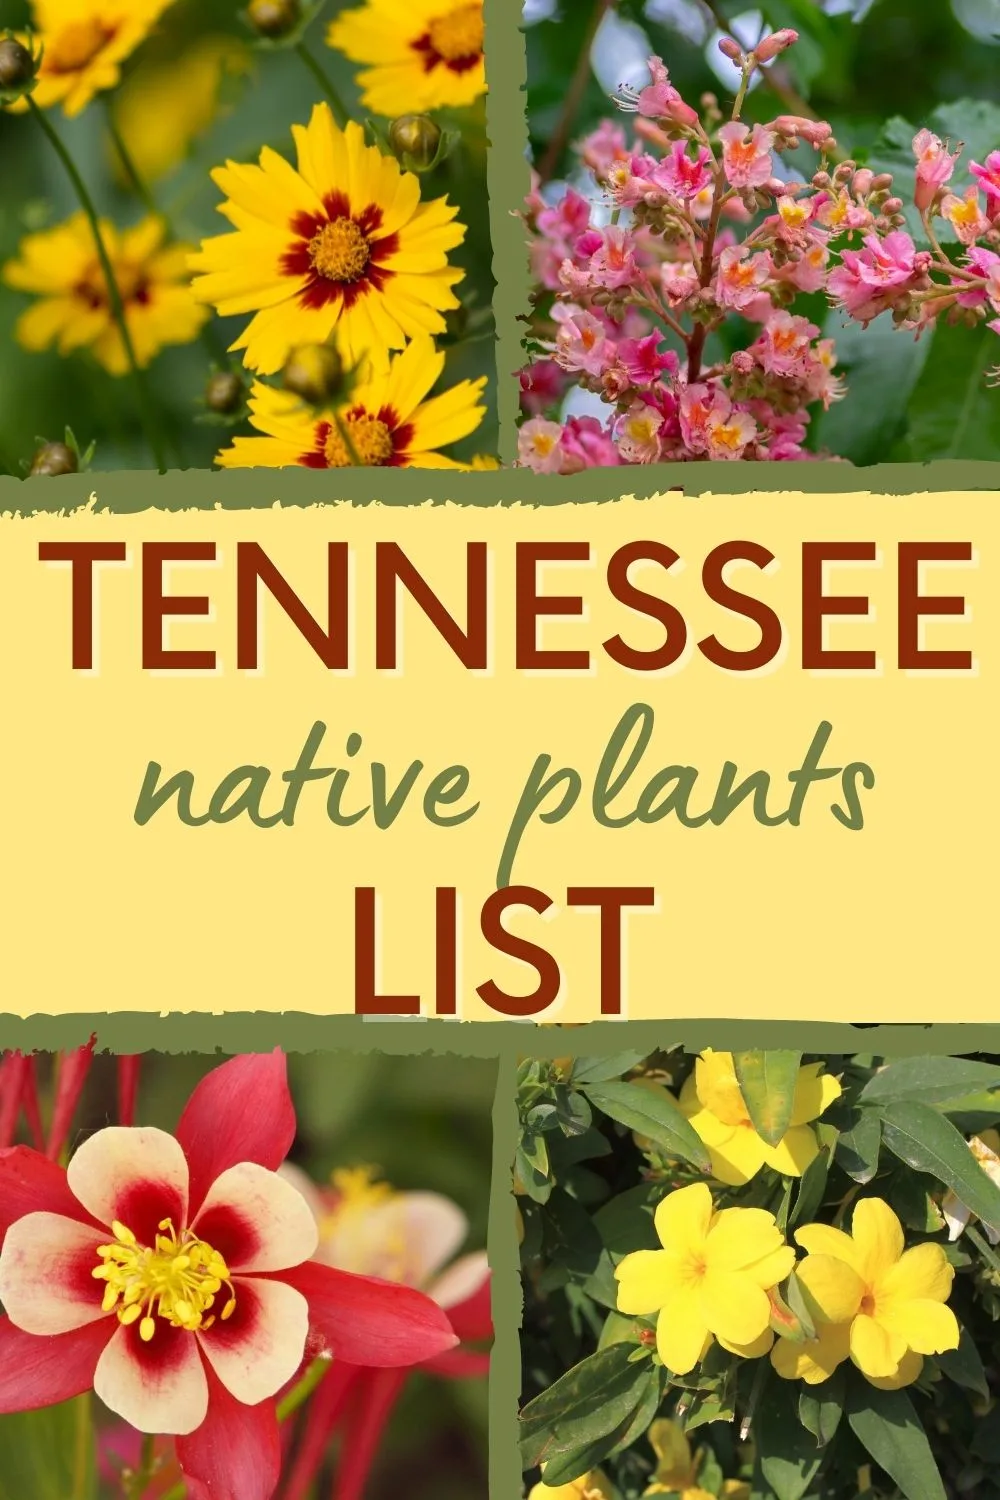 Tennessee native plants list